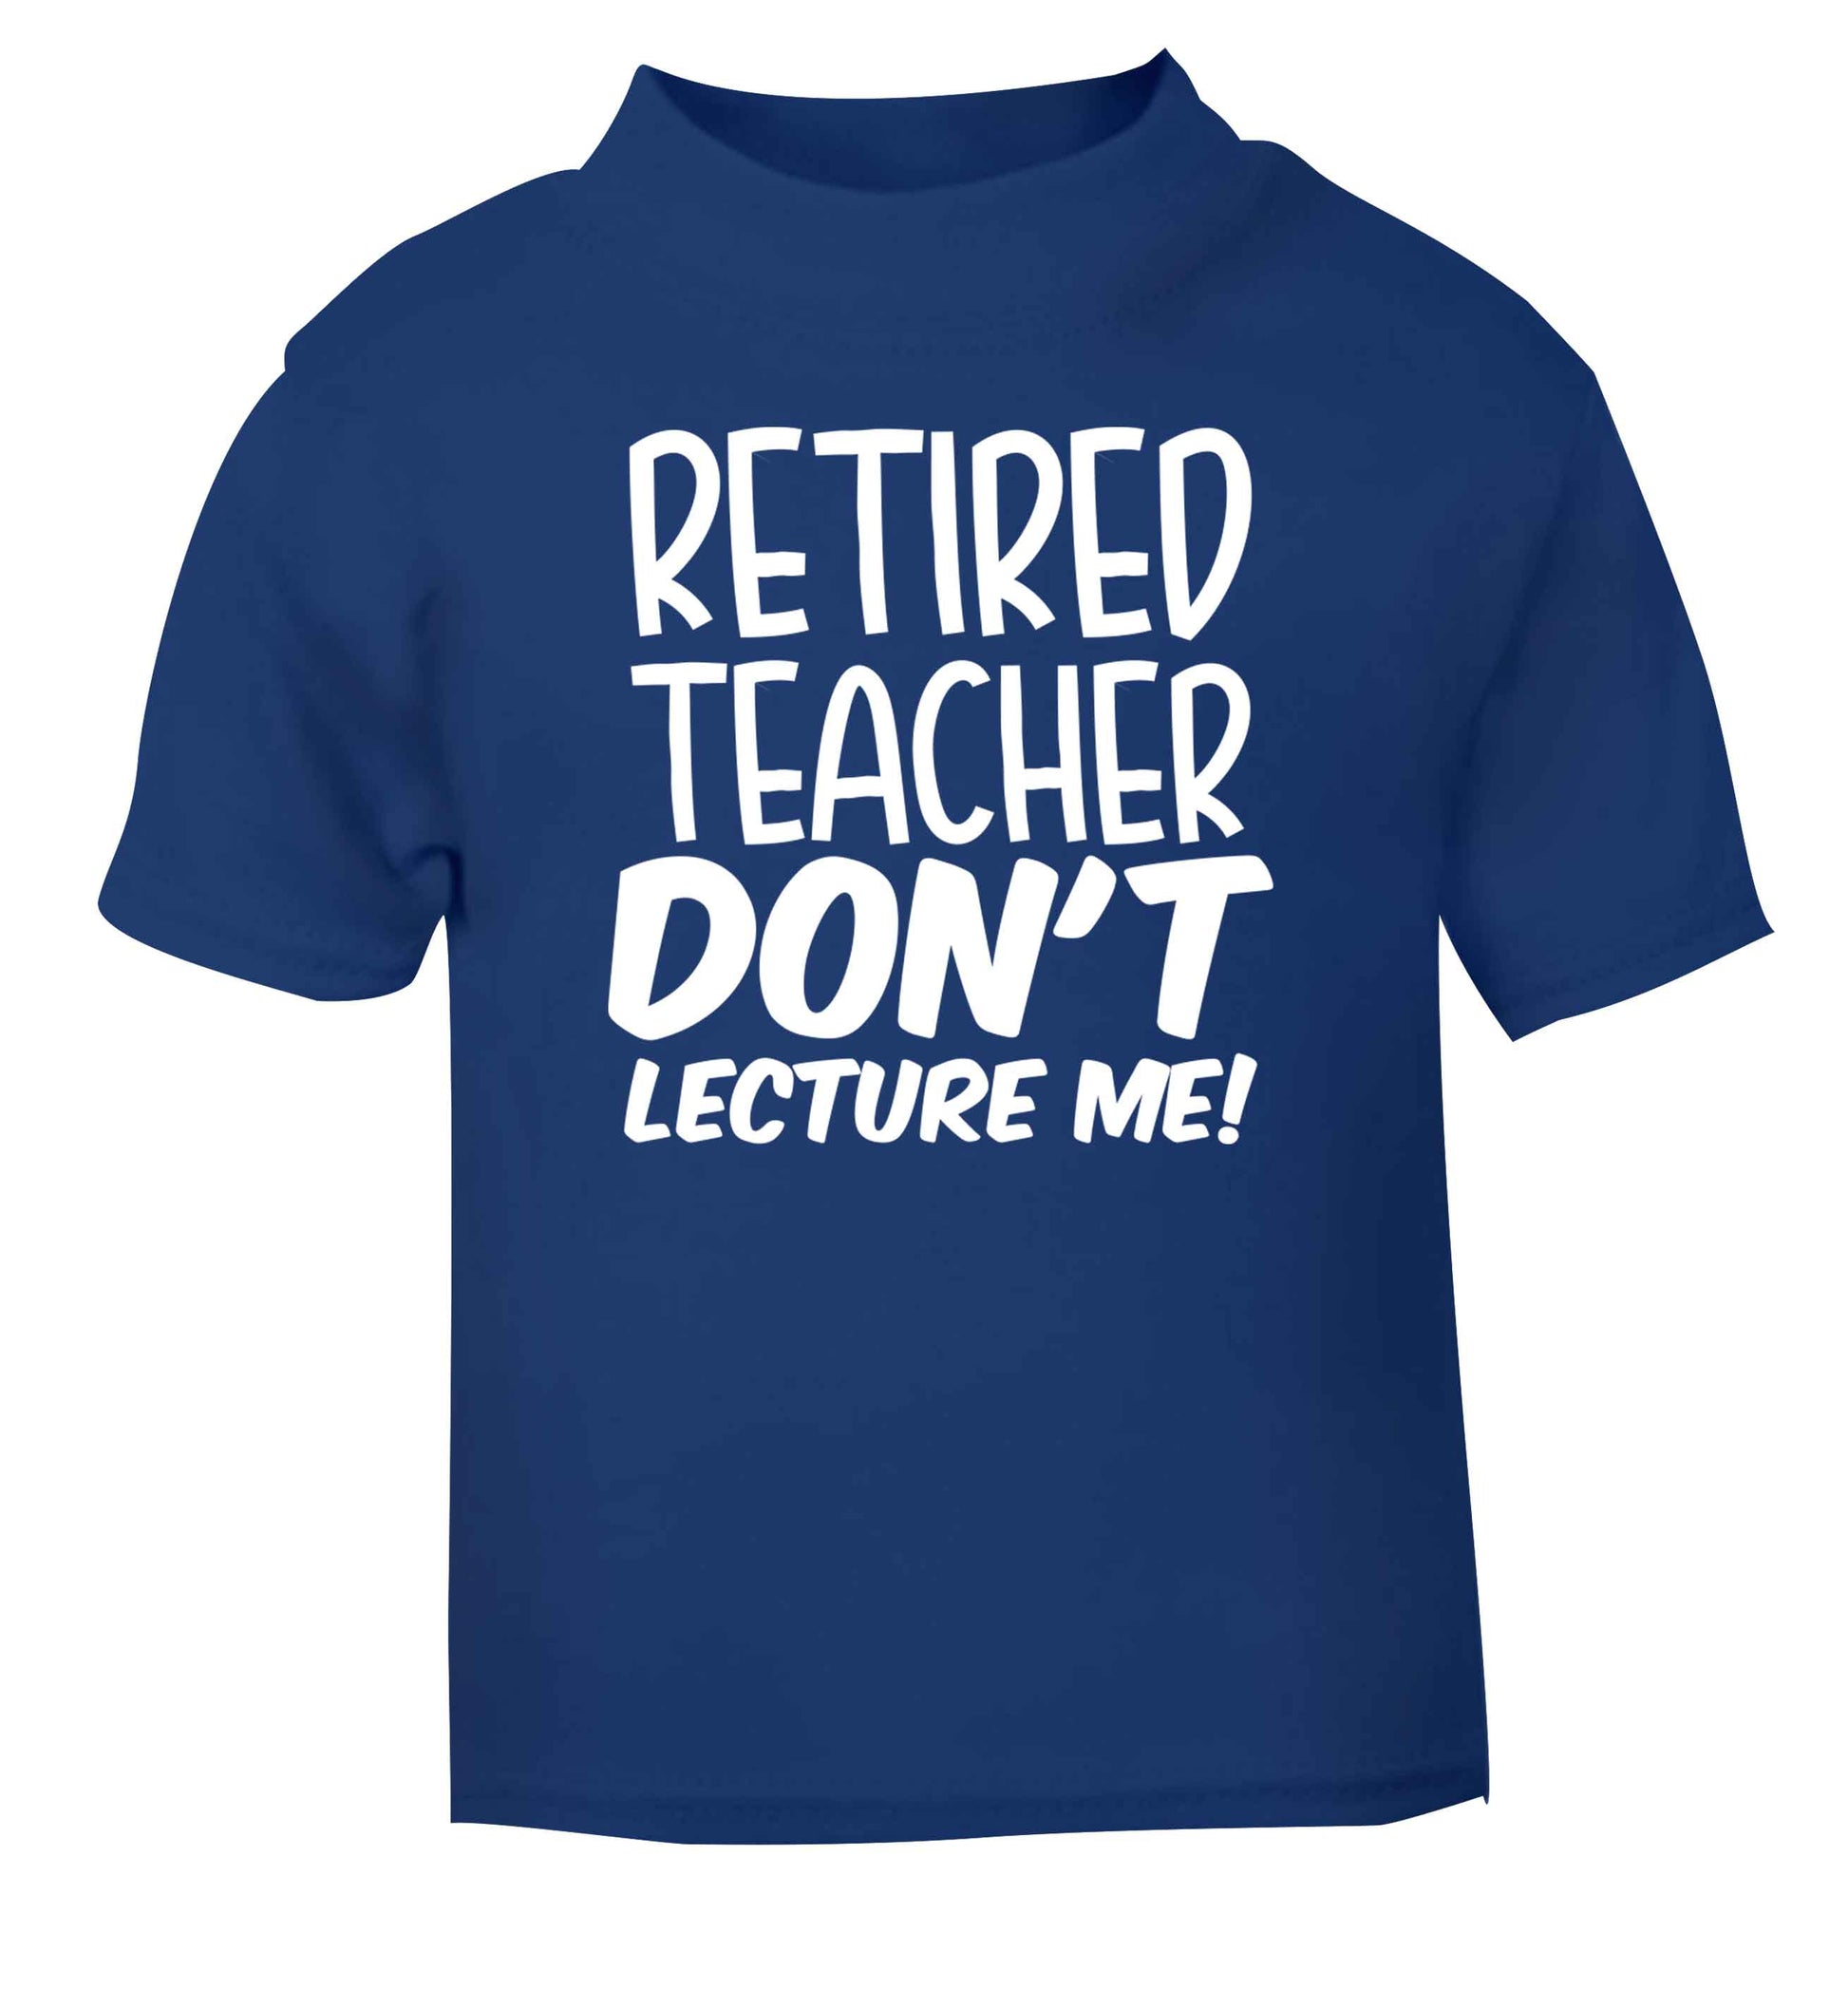 Retired teacher don't lecture me! blue Baby Toddler Tshirt 2 Years